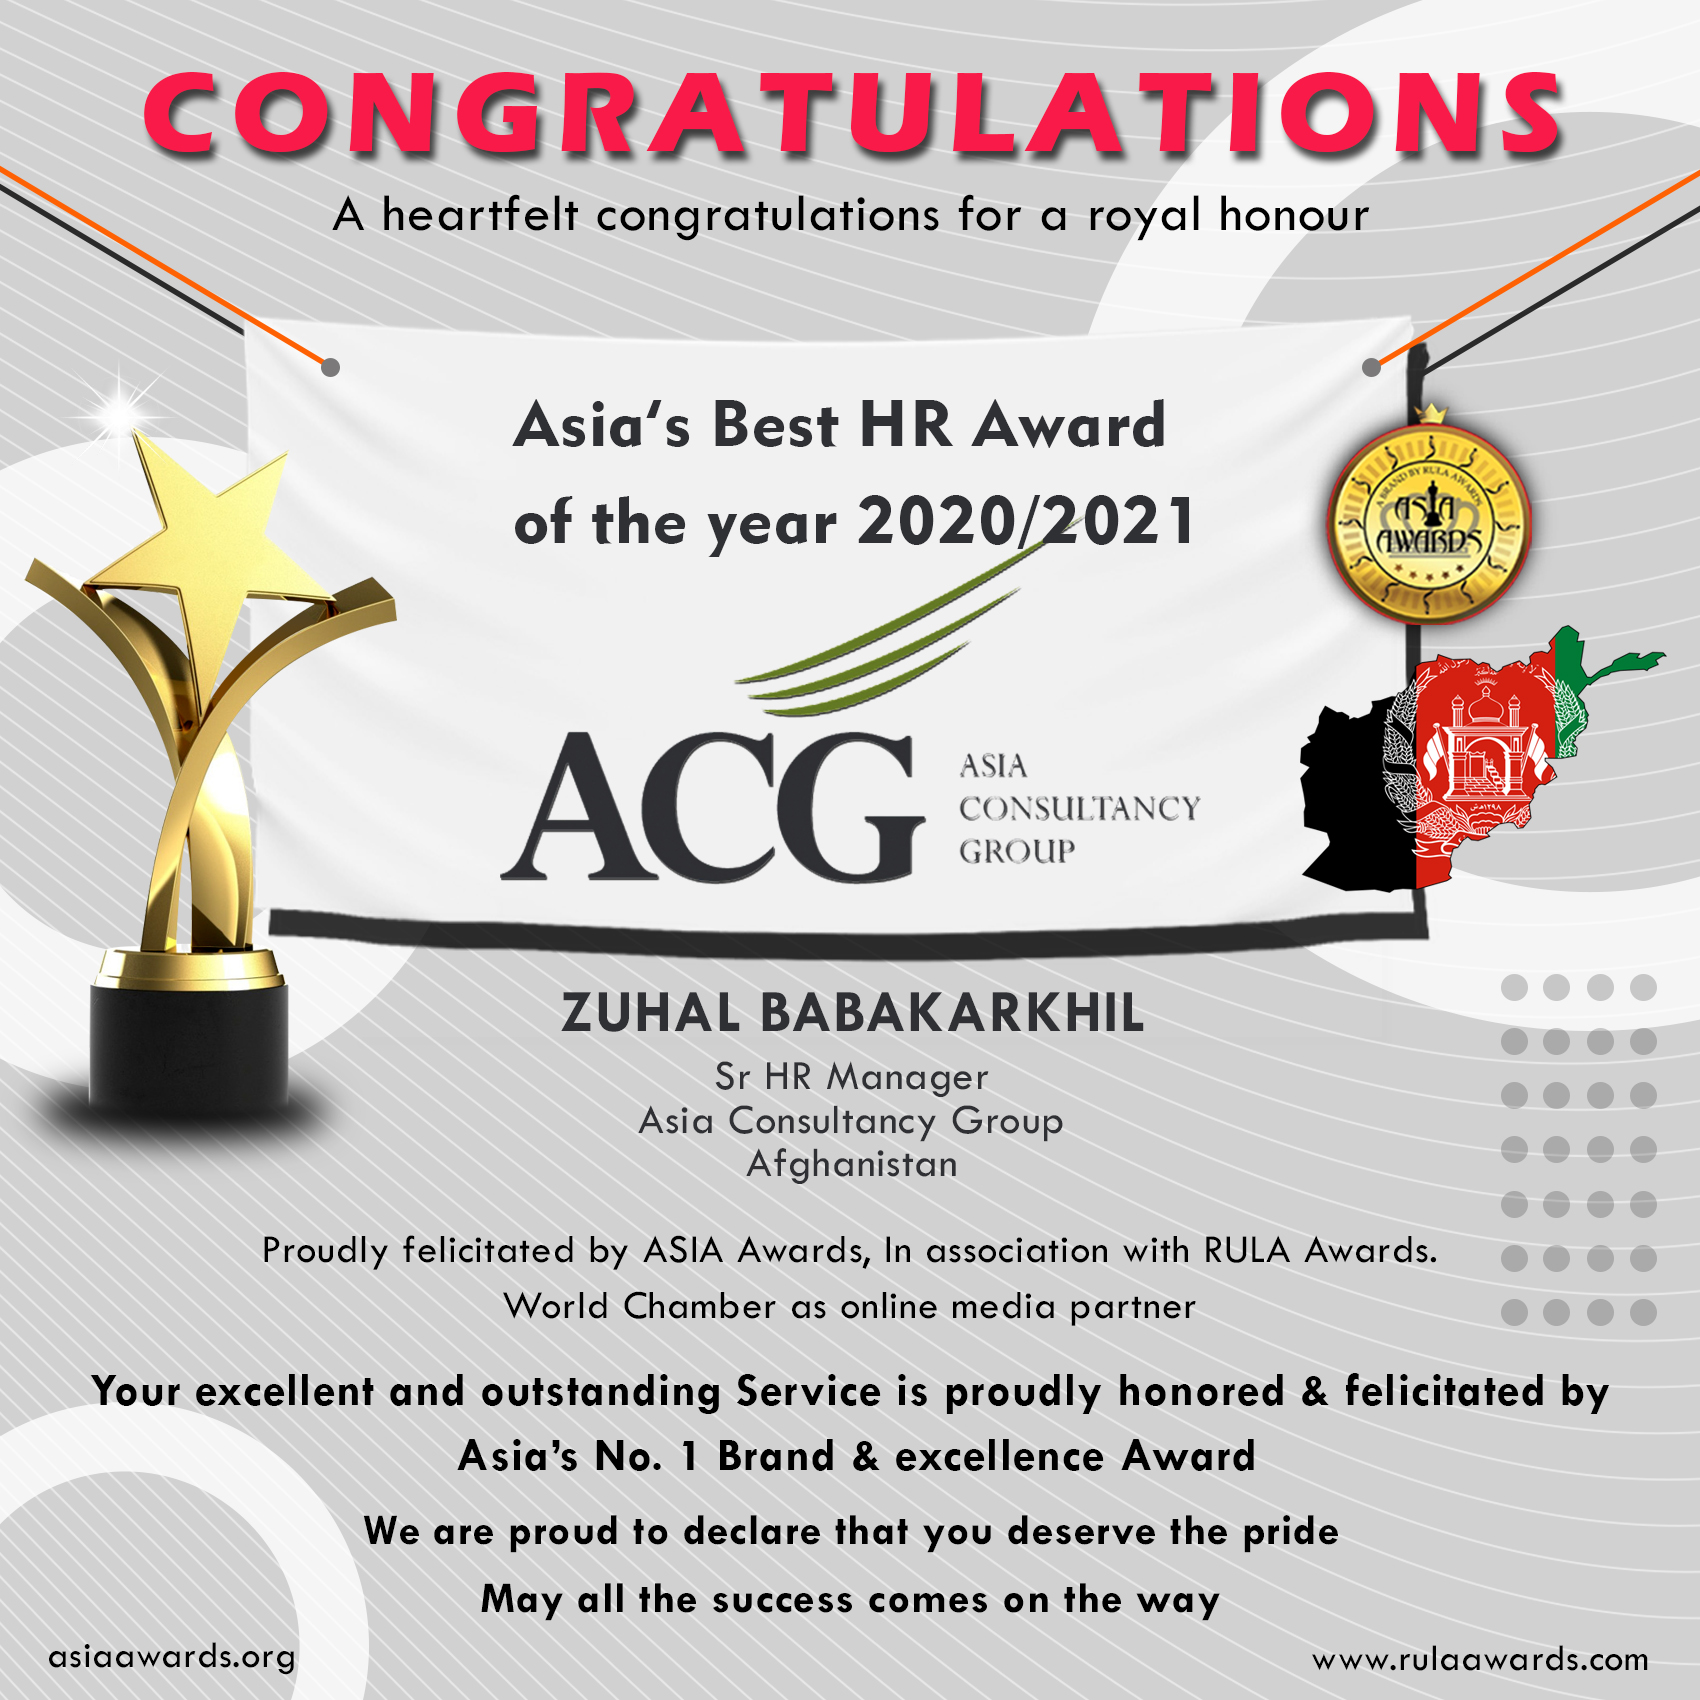 Zuhal Babakarkhil has bagged Asia's Best HR of the Year